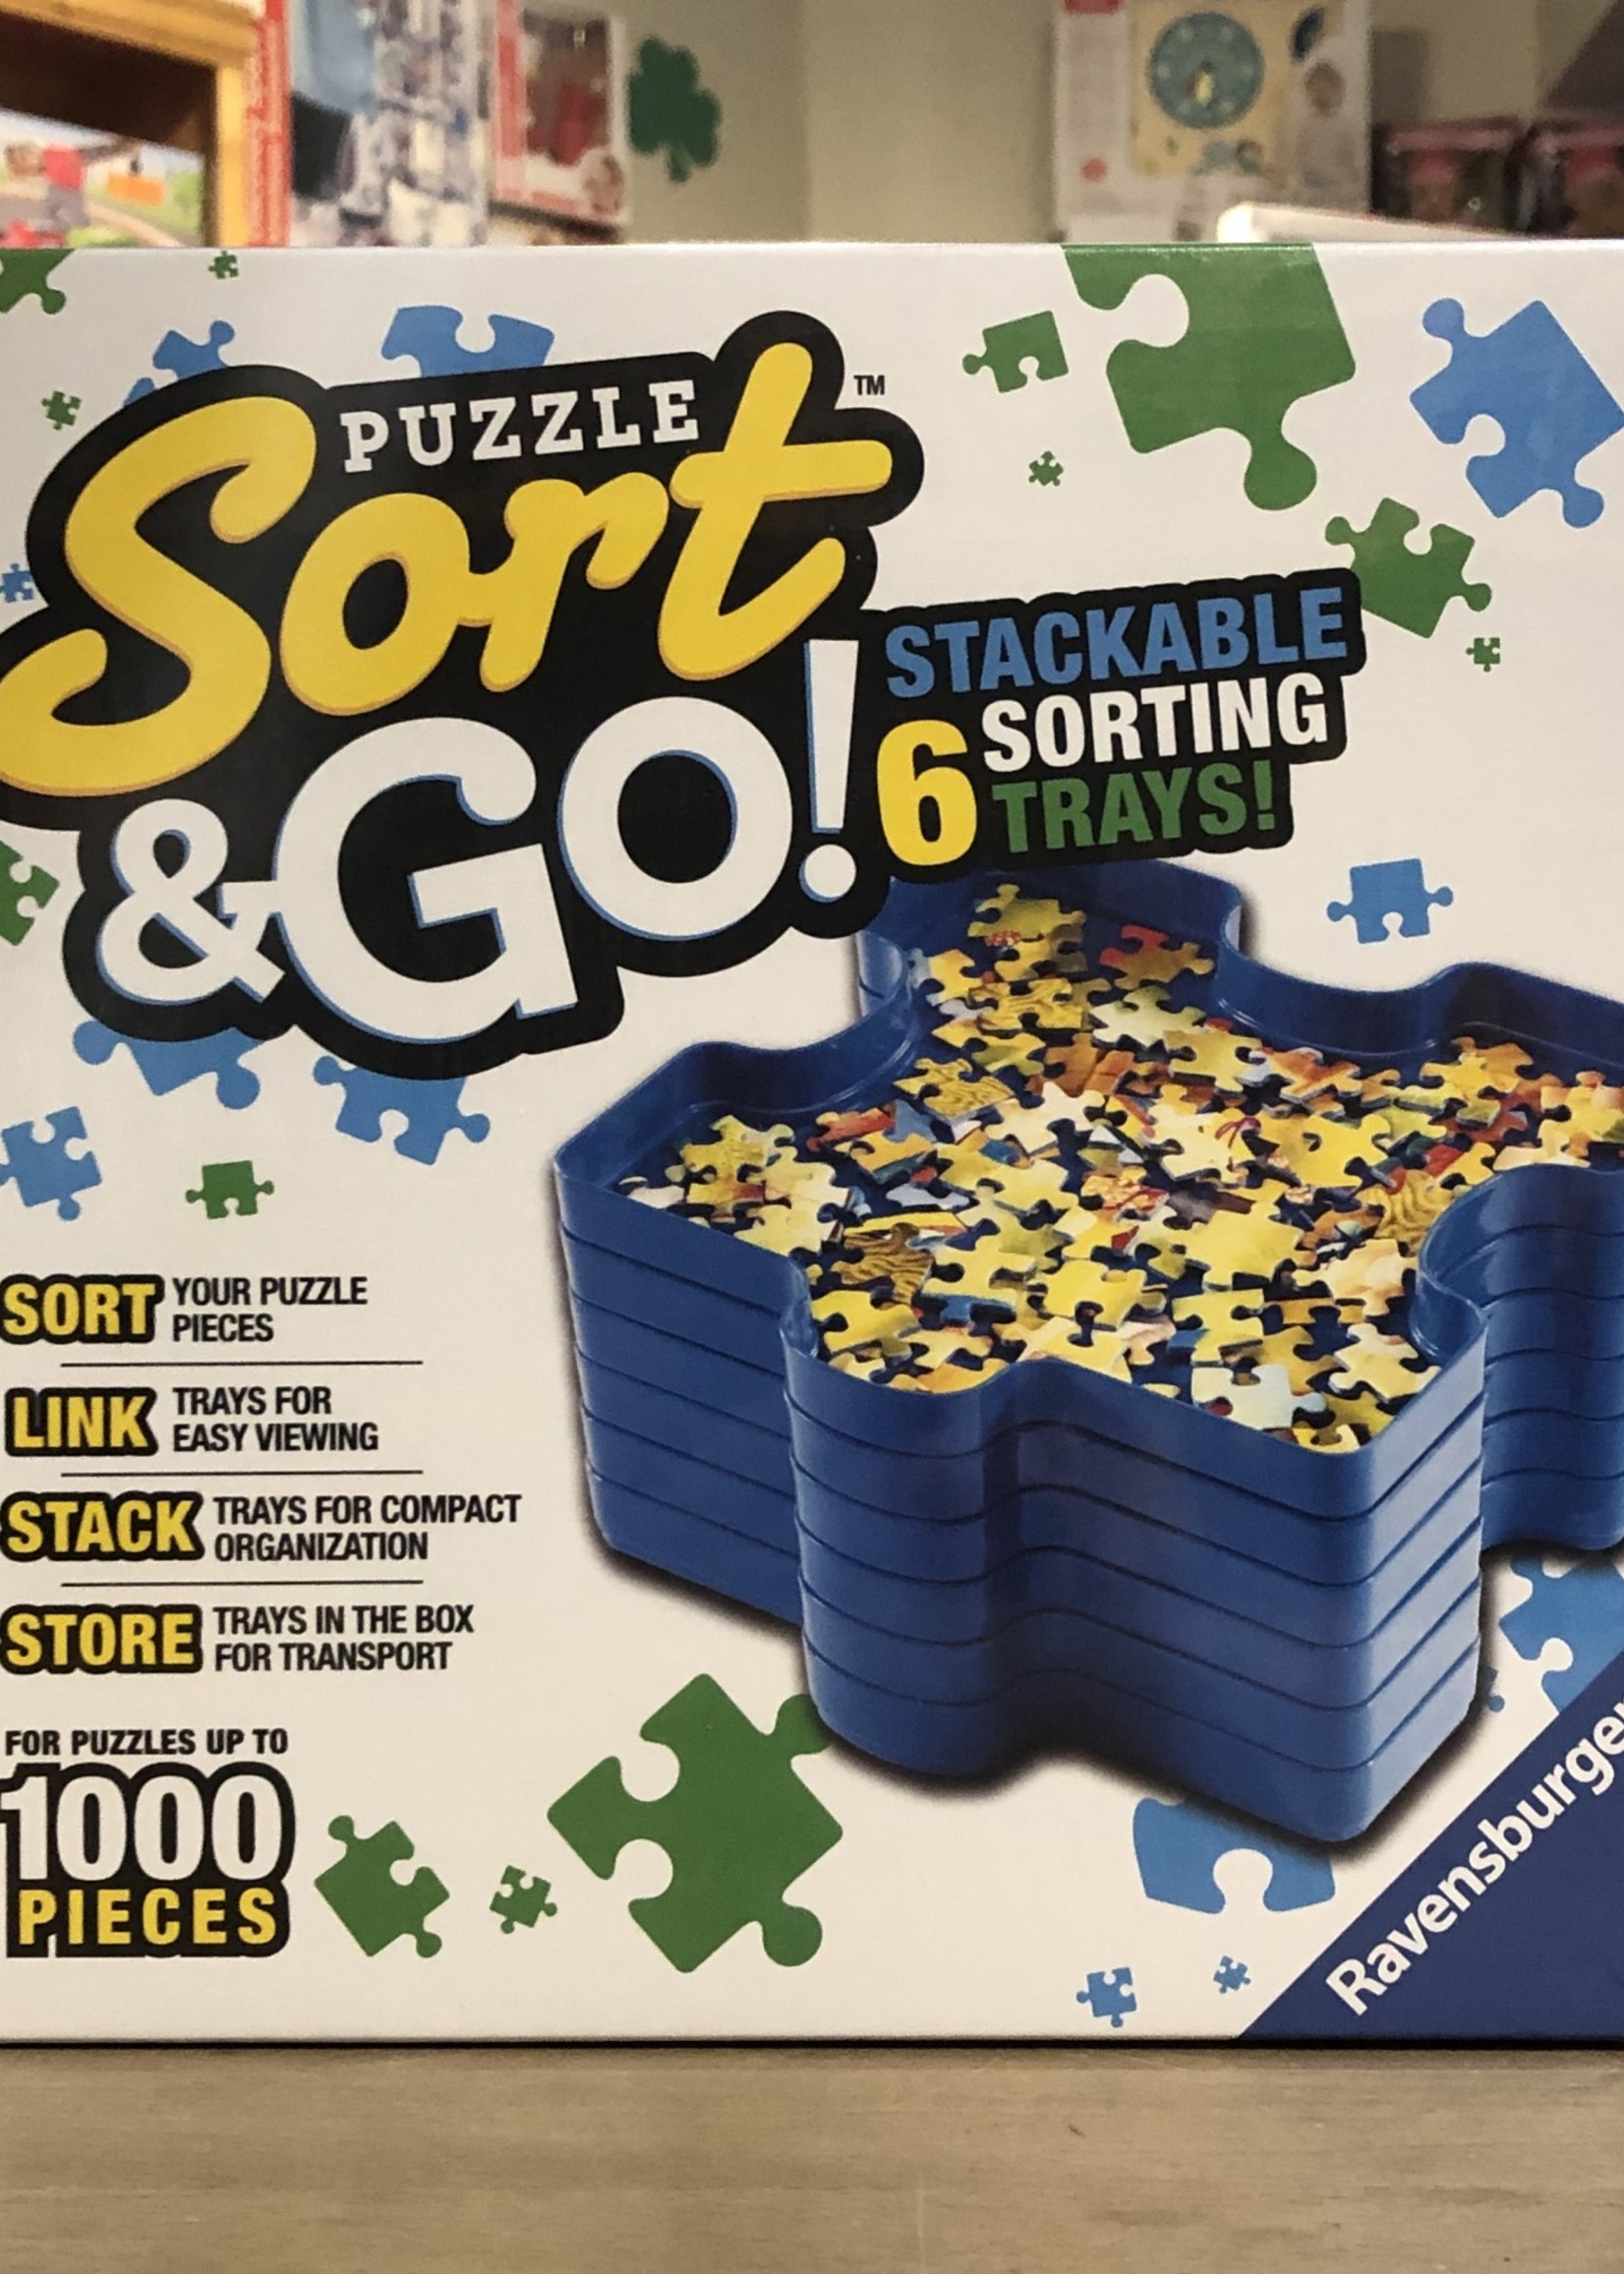 Puzzle Sort & Go! 6 Stackable Sorting Trays! For Puzzles up to